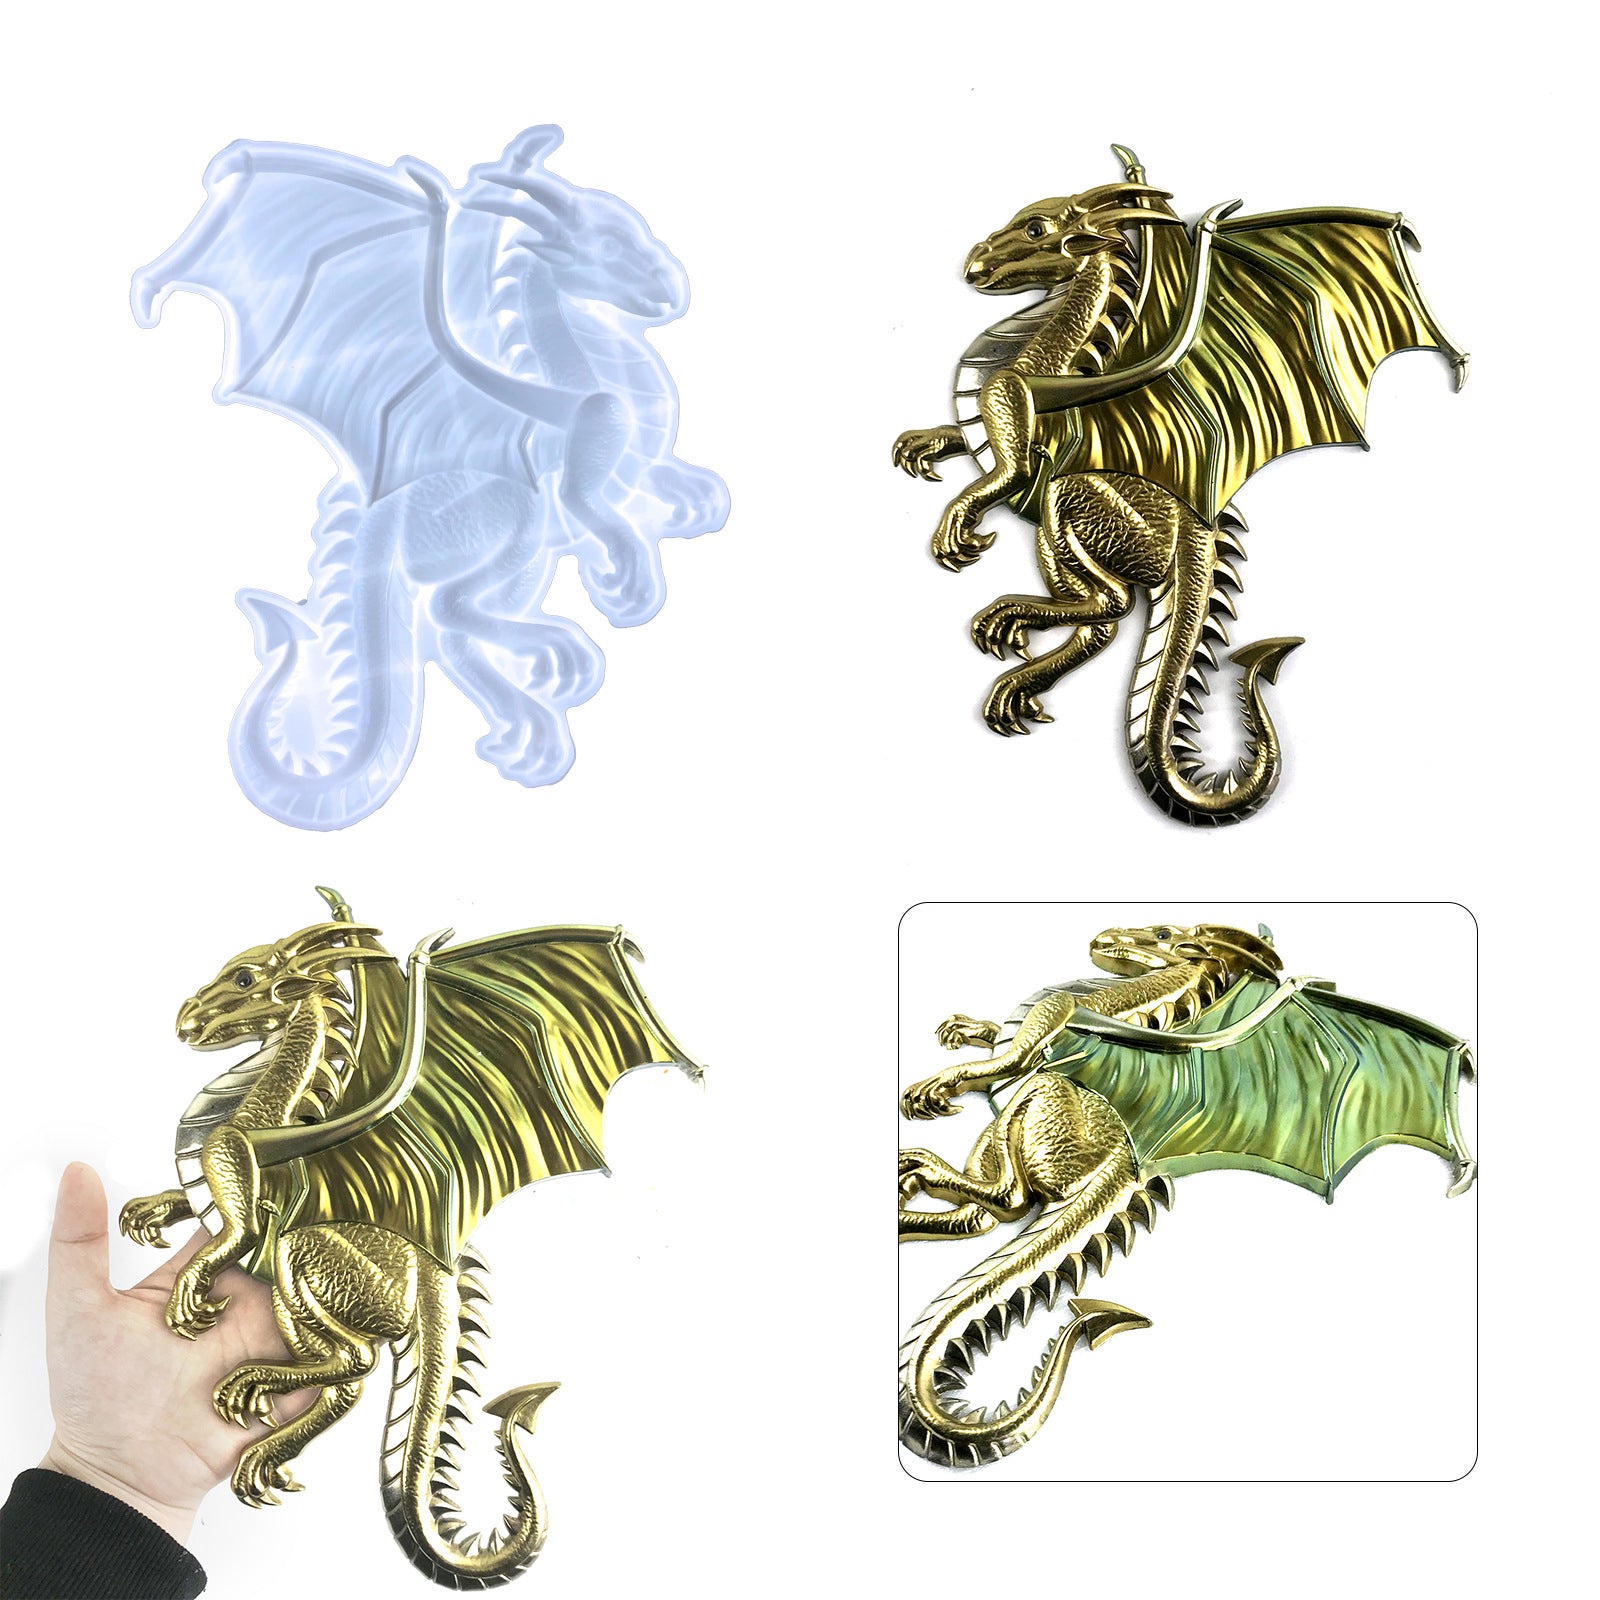  Dragon Resin Mold, 3D Silicone Molds for Epoxy Resin, Large  Animals Statue Epoxy Casting Mold for Resin Craft Wall Hanging Home Office  Decor